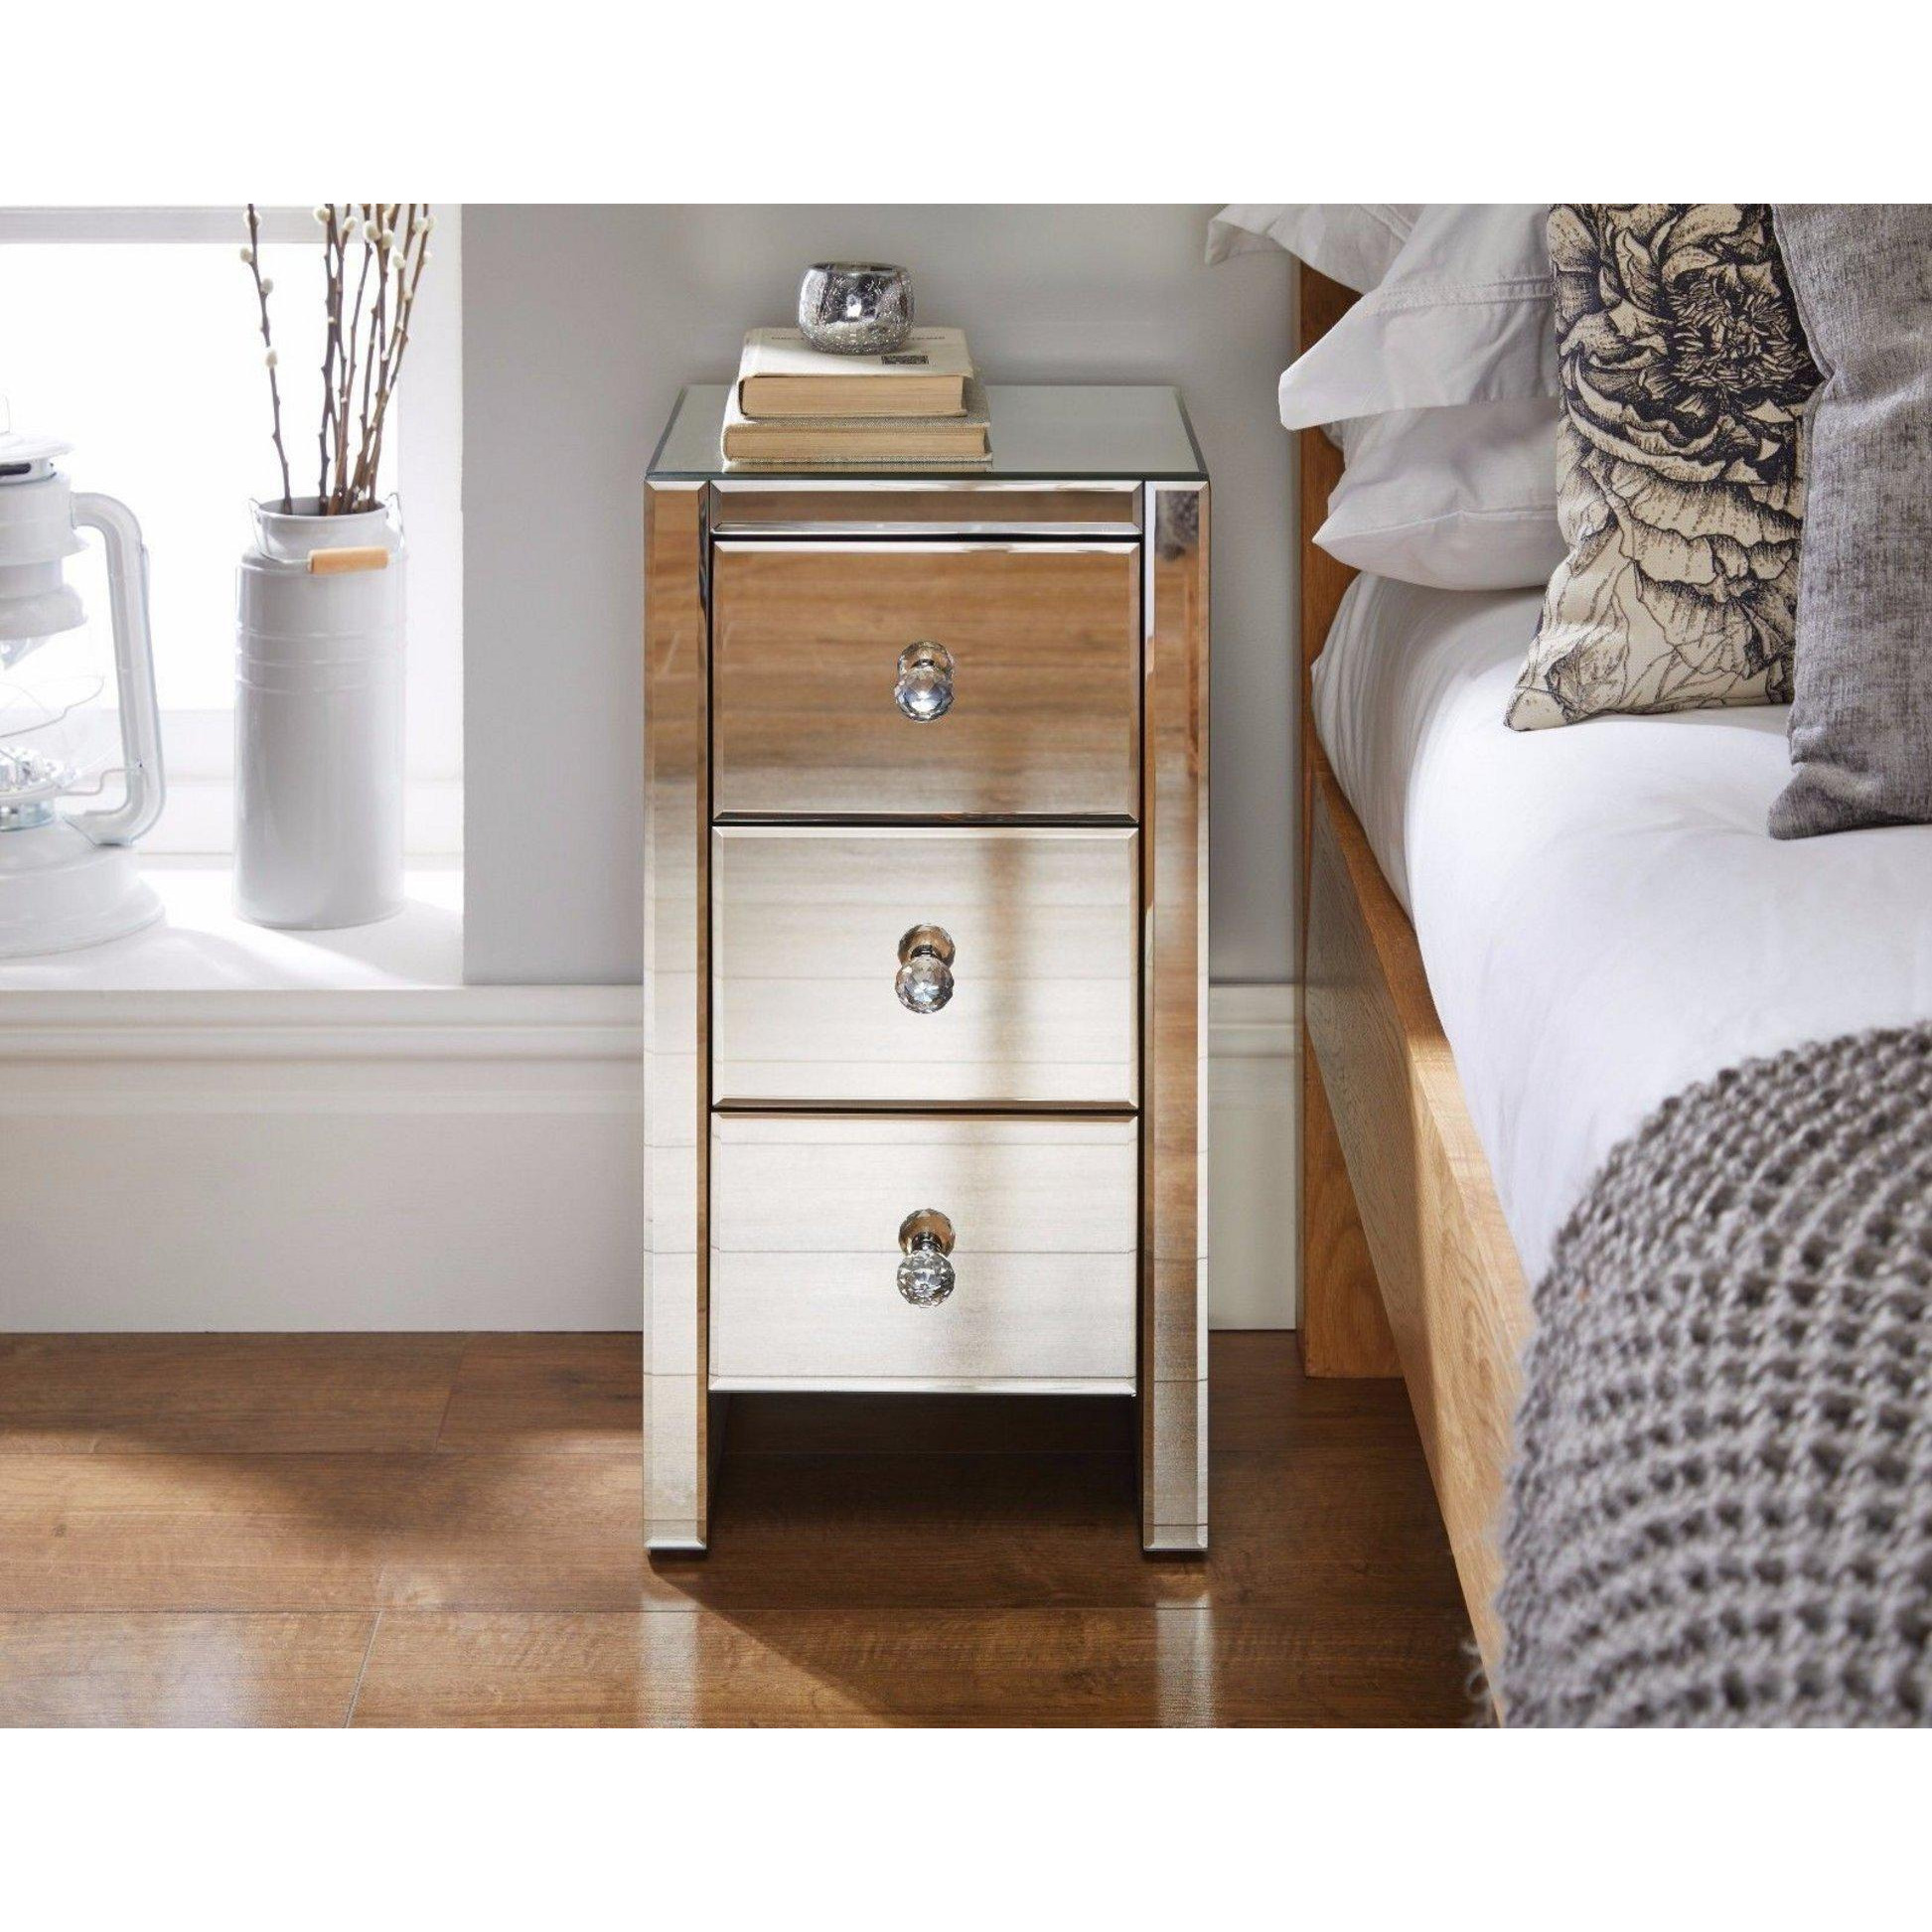 Murano Slim 3 Drawer Mirrored Square bedside Table With Crystaline Shaped Handles - image 1